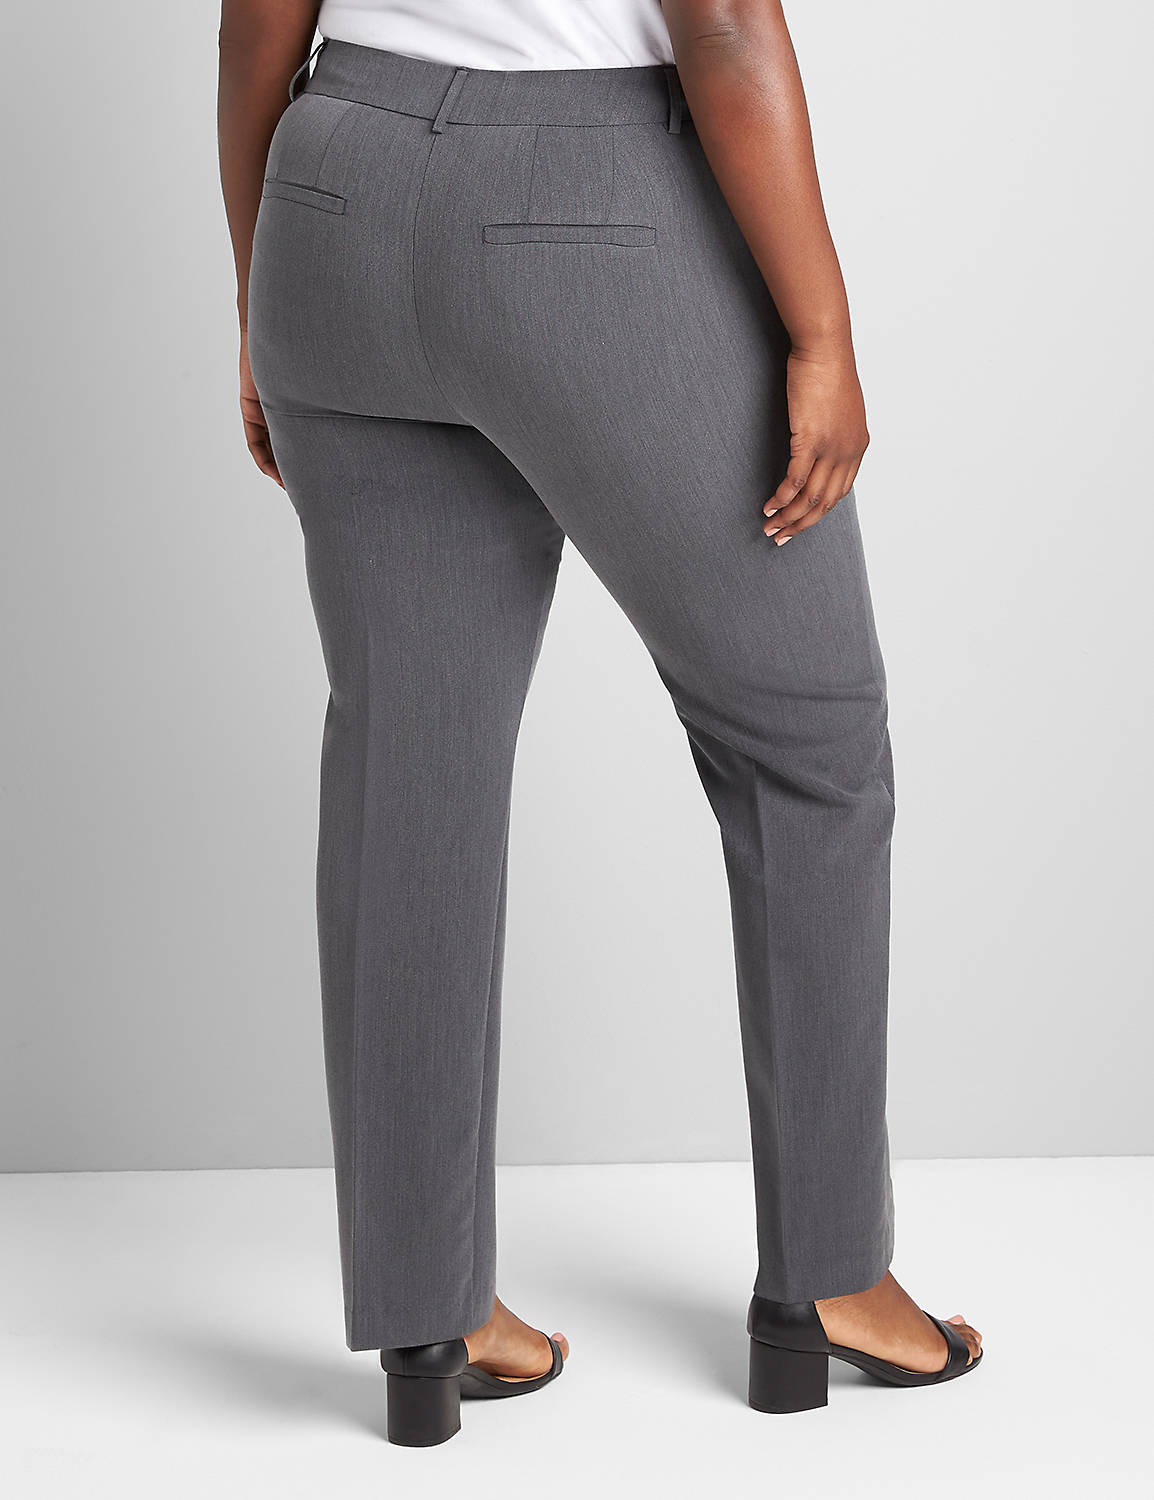 The Perfect Drape Straight Fit Straight with Magic Waistband - Deluxe 1122733:B65 Dark Heather Grey:12 Product Image 2